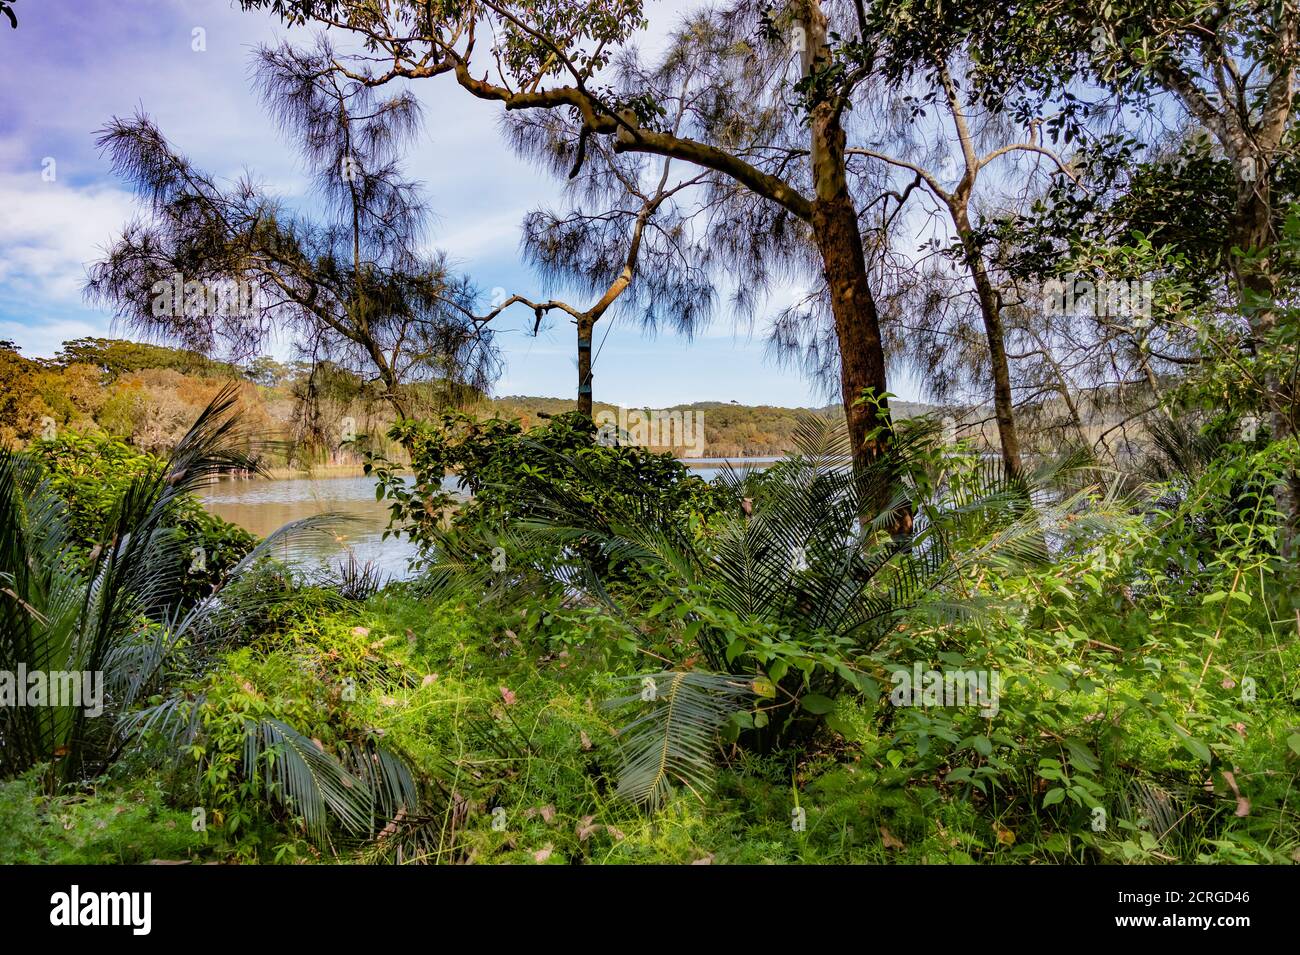 Bush track with palms and trees along the edge of Copacabana Lagoon on the Central Coast of NSW, Australia Stock Photo